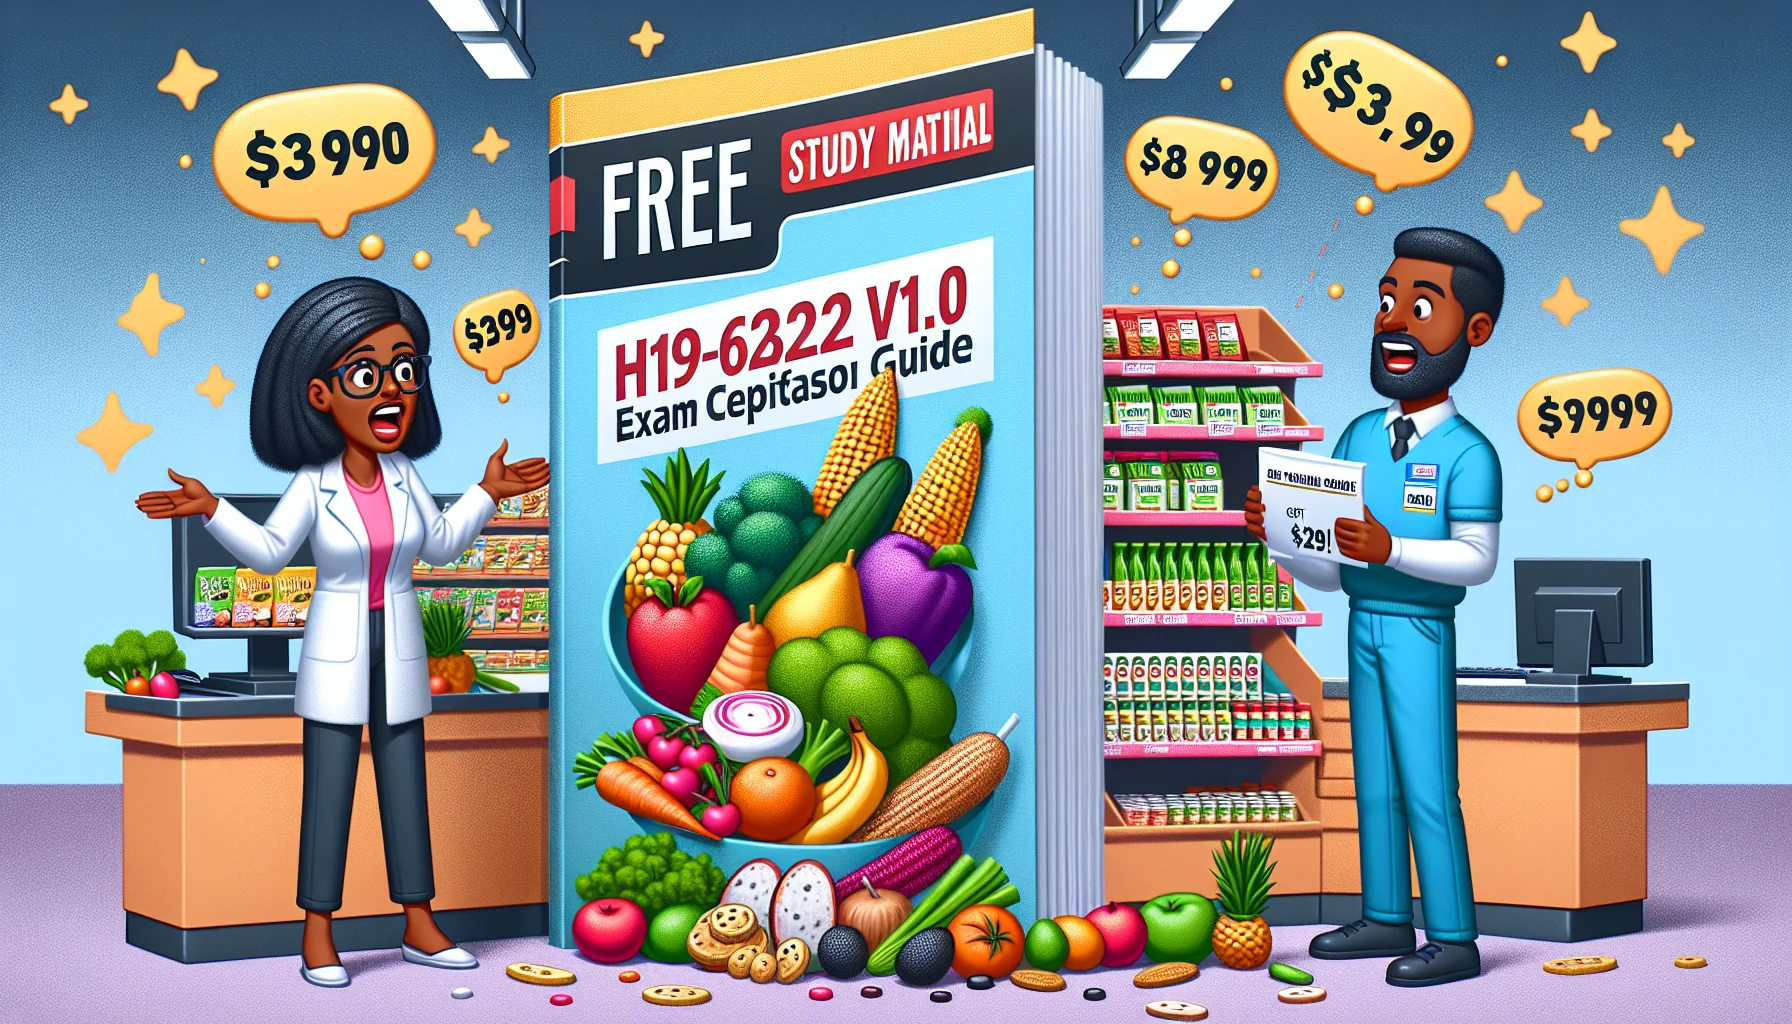 Realistic image embodying a humorous situation where free study material for an unnamed IT certification exam, represented by a big booklet labelled as 'H19-622_V1.0 Exam Study Guide', visually draws attention. It's accompanied by cartoon characters encouraging dietary wellbeing. These characters, a Black woman nutritionist and a Hispanic man supermarket cashier, are communicating the benefit of saving money by showcasing their favourite healthy foods: colorful fruits, green vegetables, whole grains, lean protein, and so on, with price tags showing surprisingly low numbers. The mood is light-hearted and educational, with dotted lines and fun emojis indicating cost savings.